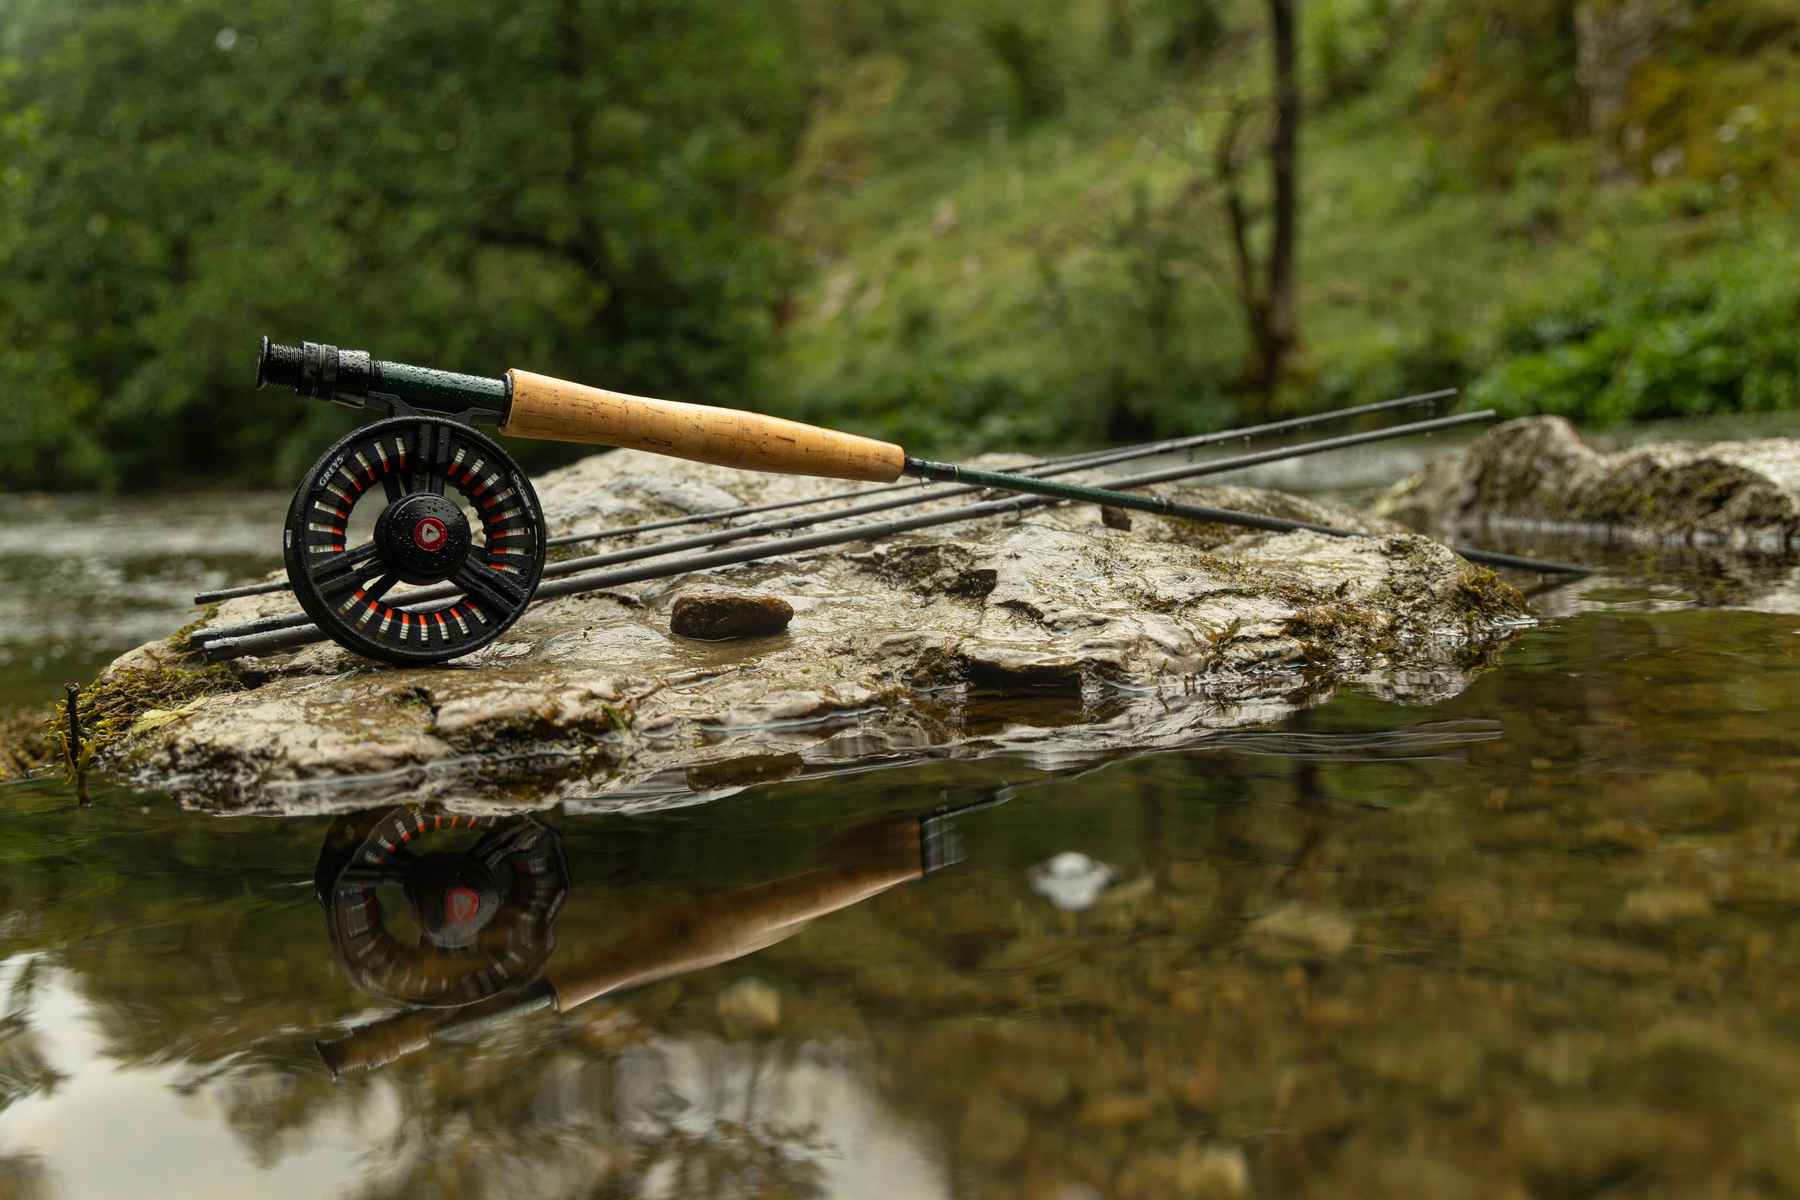 Greys introduces new, budget-friendly Cruise fly rod and reel